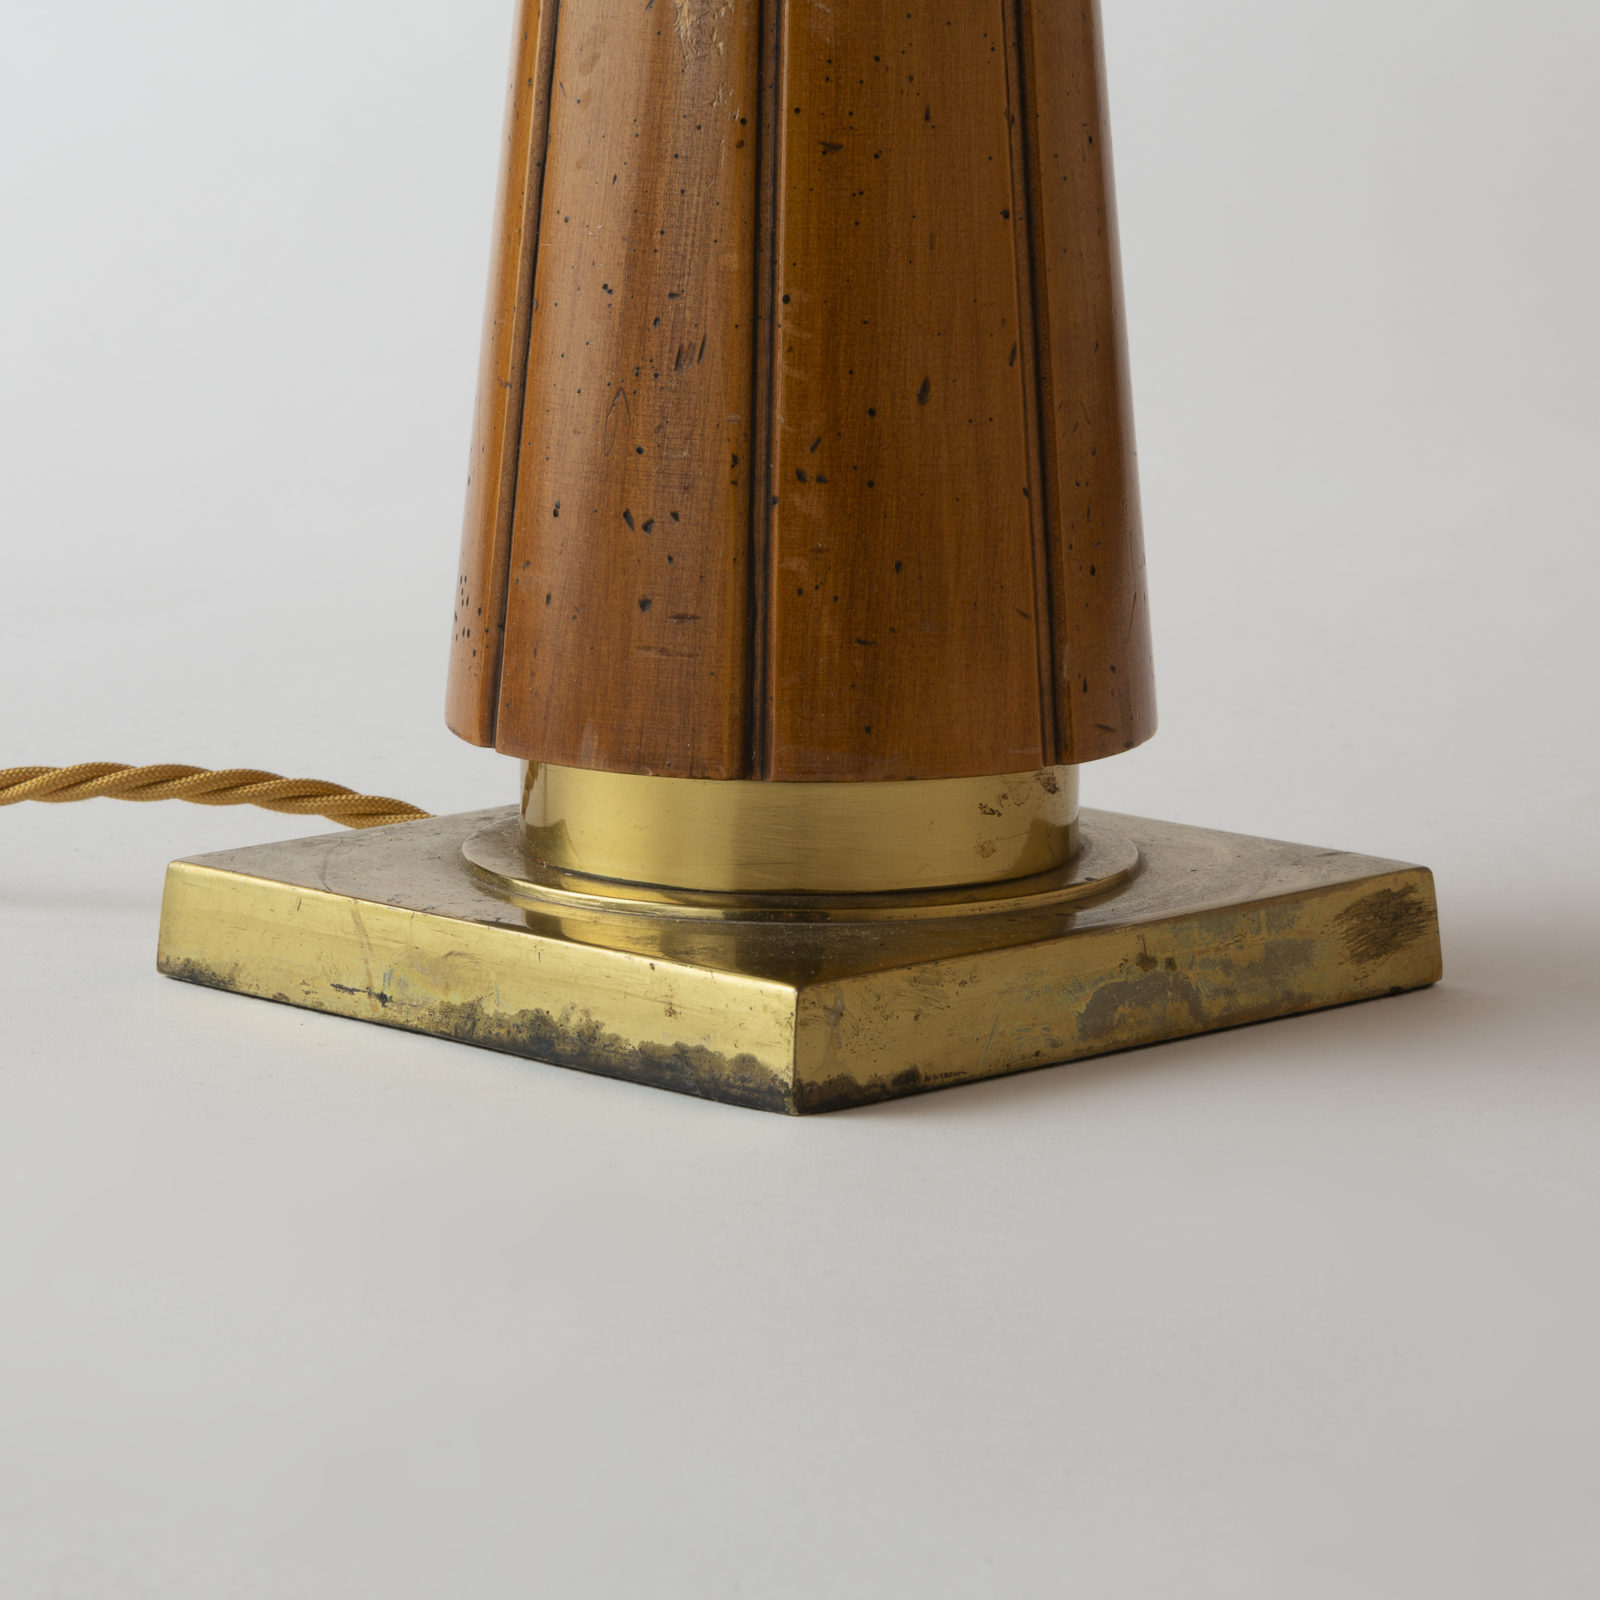 Tall Table Lamp